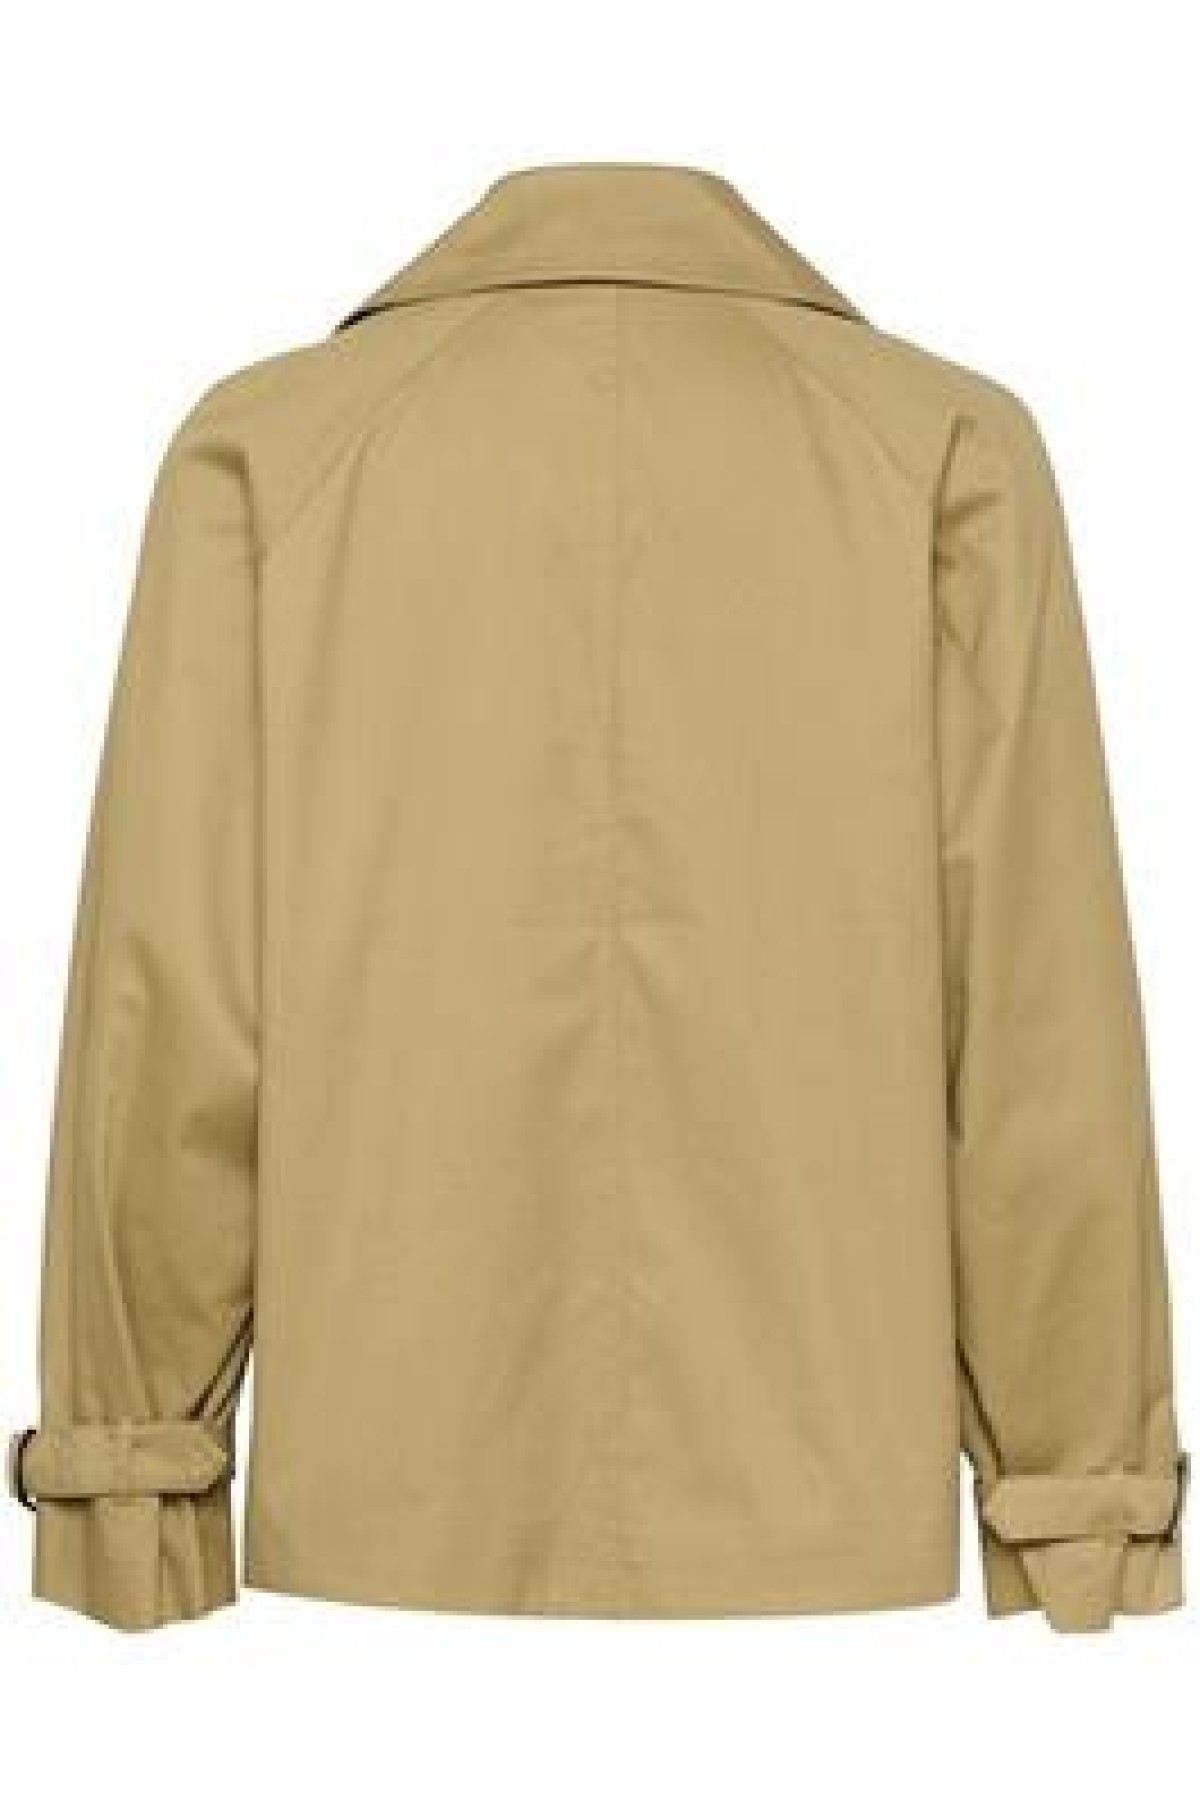 SHORT JACKET - TWO COLORS - BLUE AND BEIGE